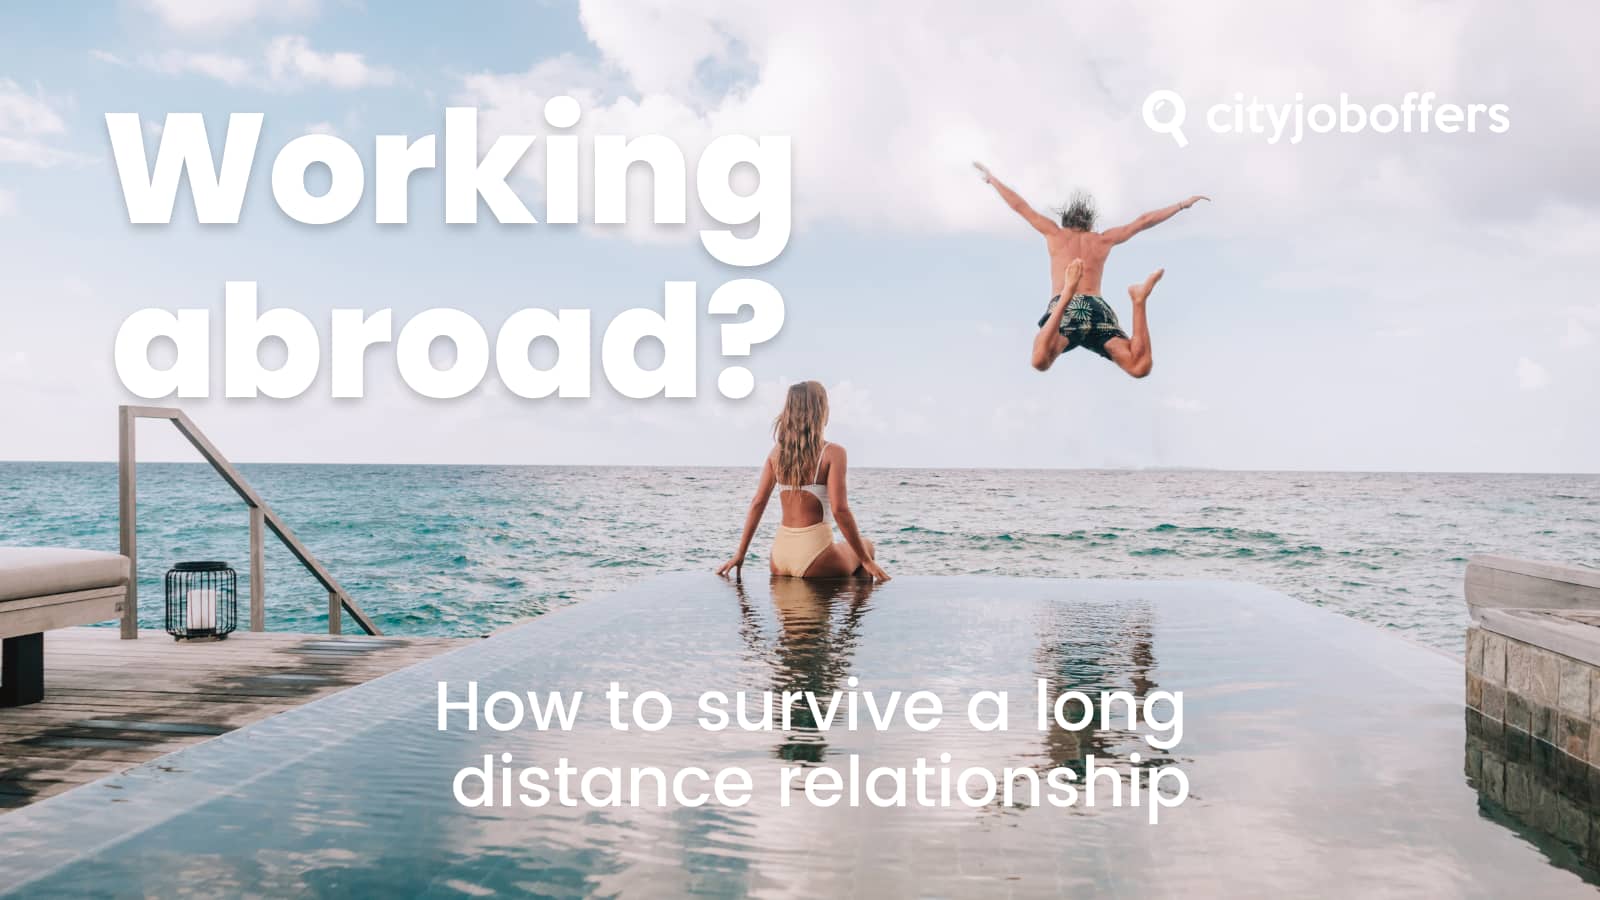 How to Tell If a Long-Distance Relationship Is Going to Work for You